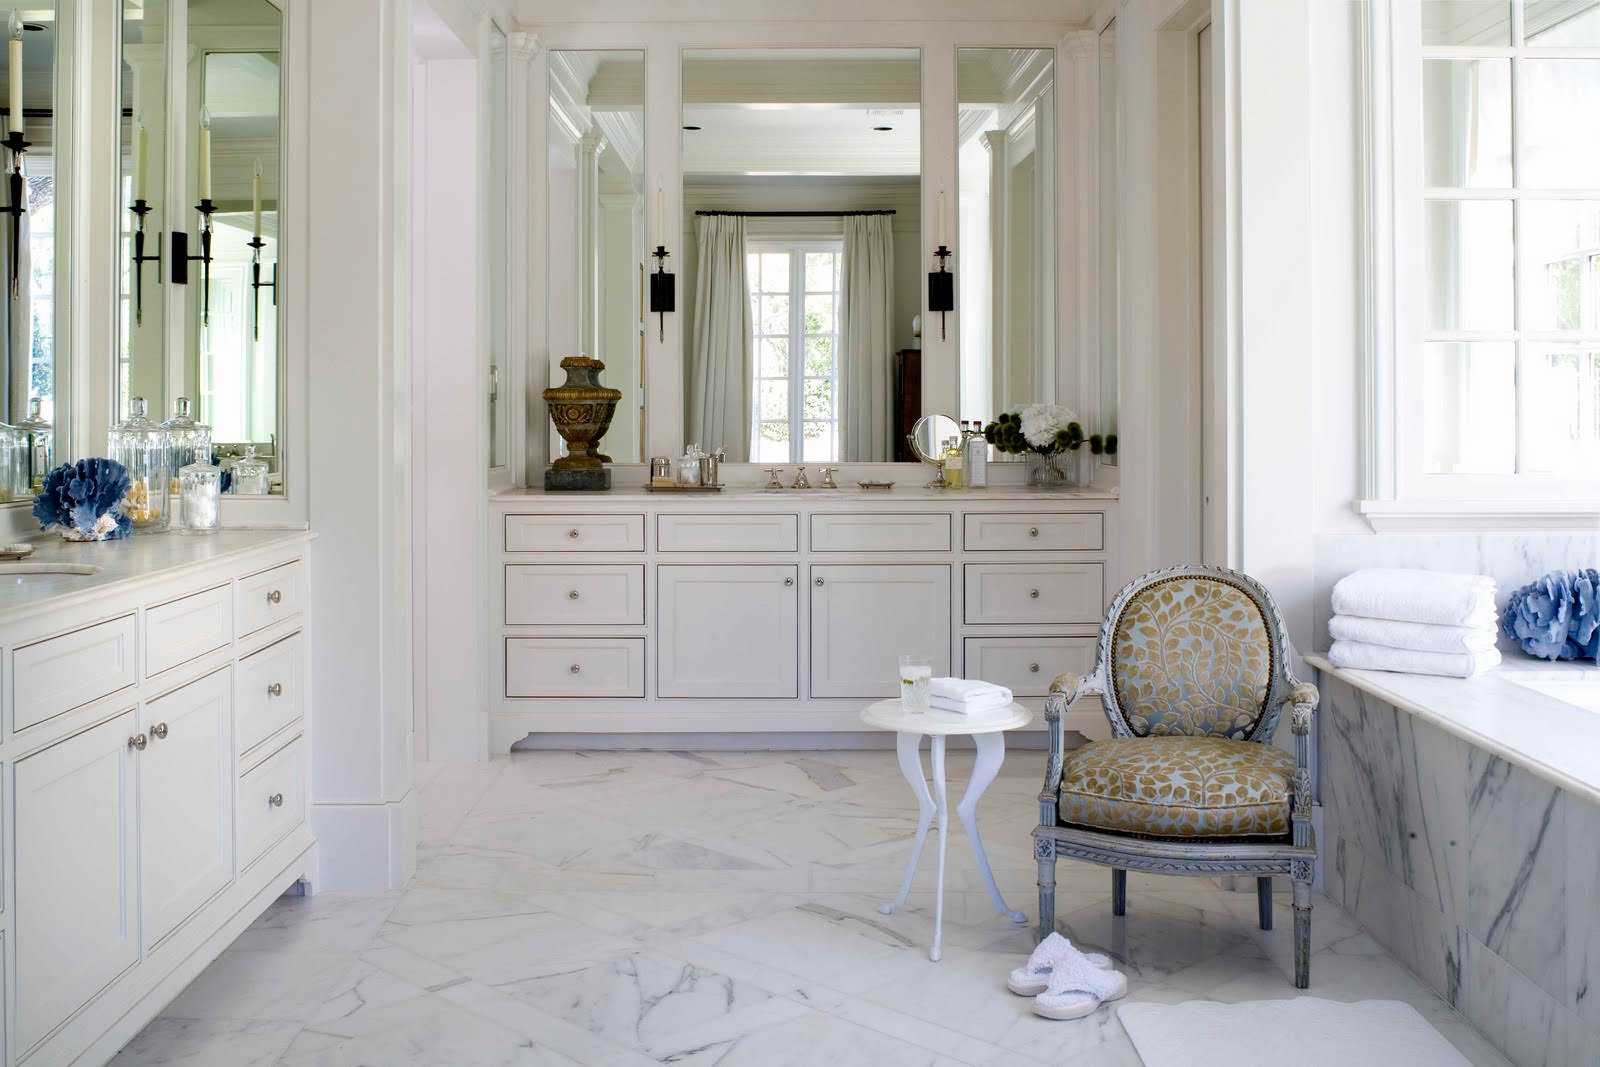 version of the unusual interior of the bathroom in a classic style